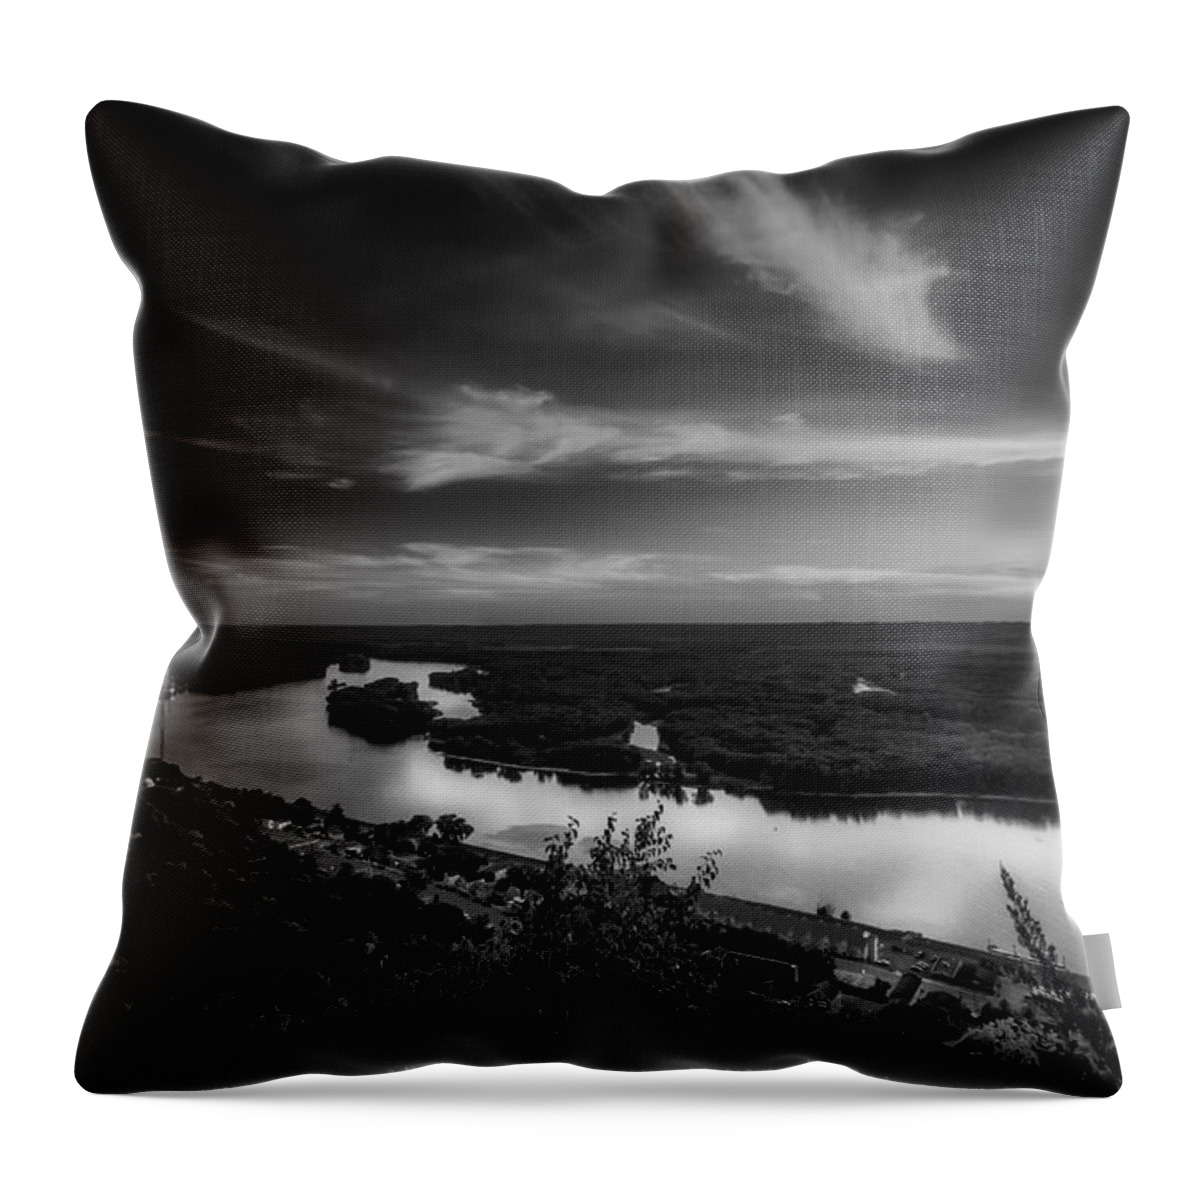 Minnesota Wisconsin Alma Power Plant Black White Grey Gray Sky Clouds Trees Landscape Nature Natural Island Water River Stream Creek Lake Ocean Leaves Leaf City Town Village Train Contrast Art Artwork Canvas Wall Hang Beauty Peaceful Serenity Calm Zen Throw Pillow featuring the photograph Upper Mississippi River by Tom Gort